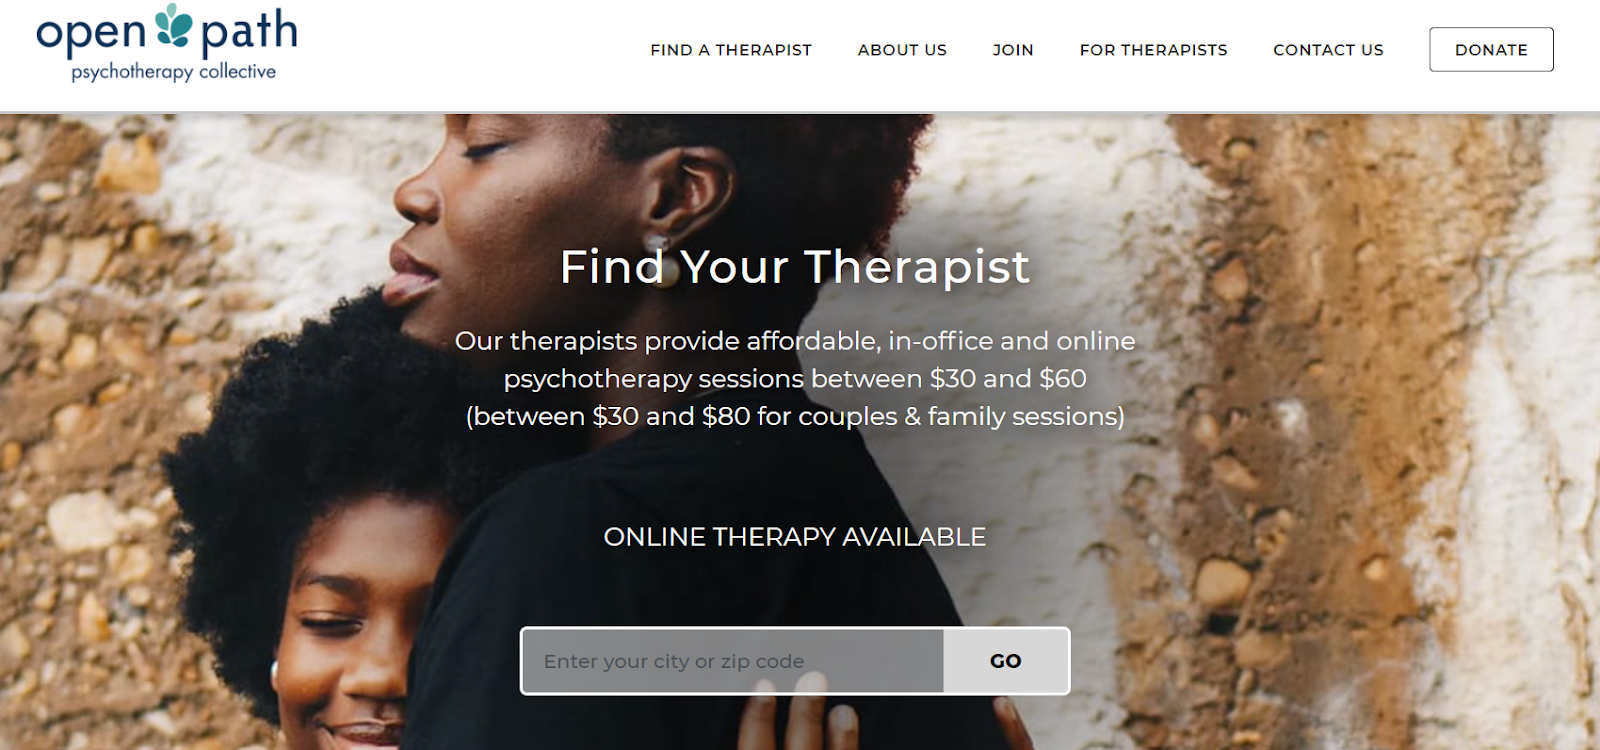 Screenshot of Open Path 'Find Your Therapist' zip code search box
https://openpathcollective.org/